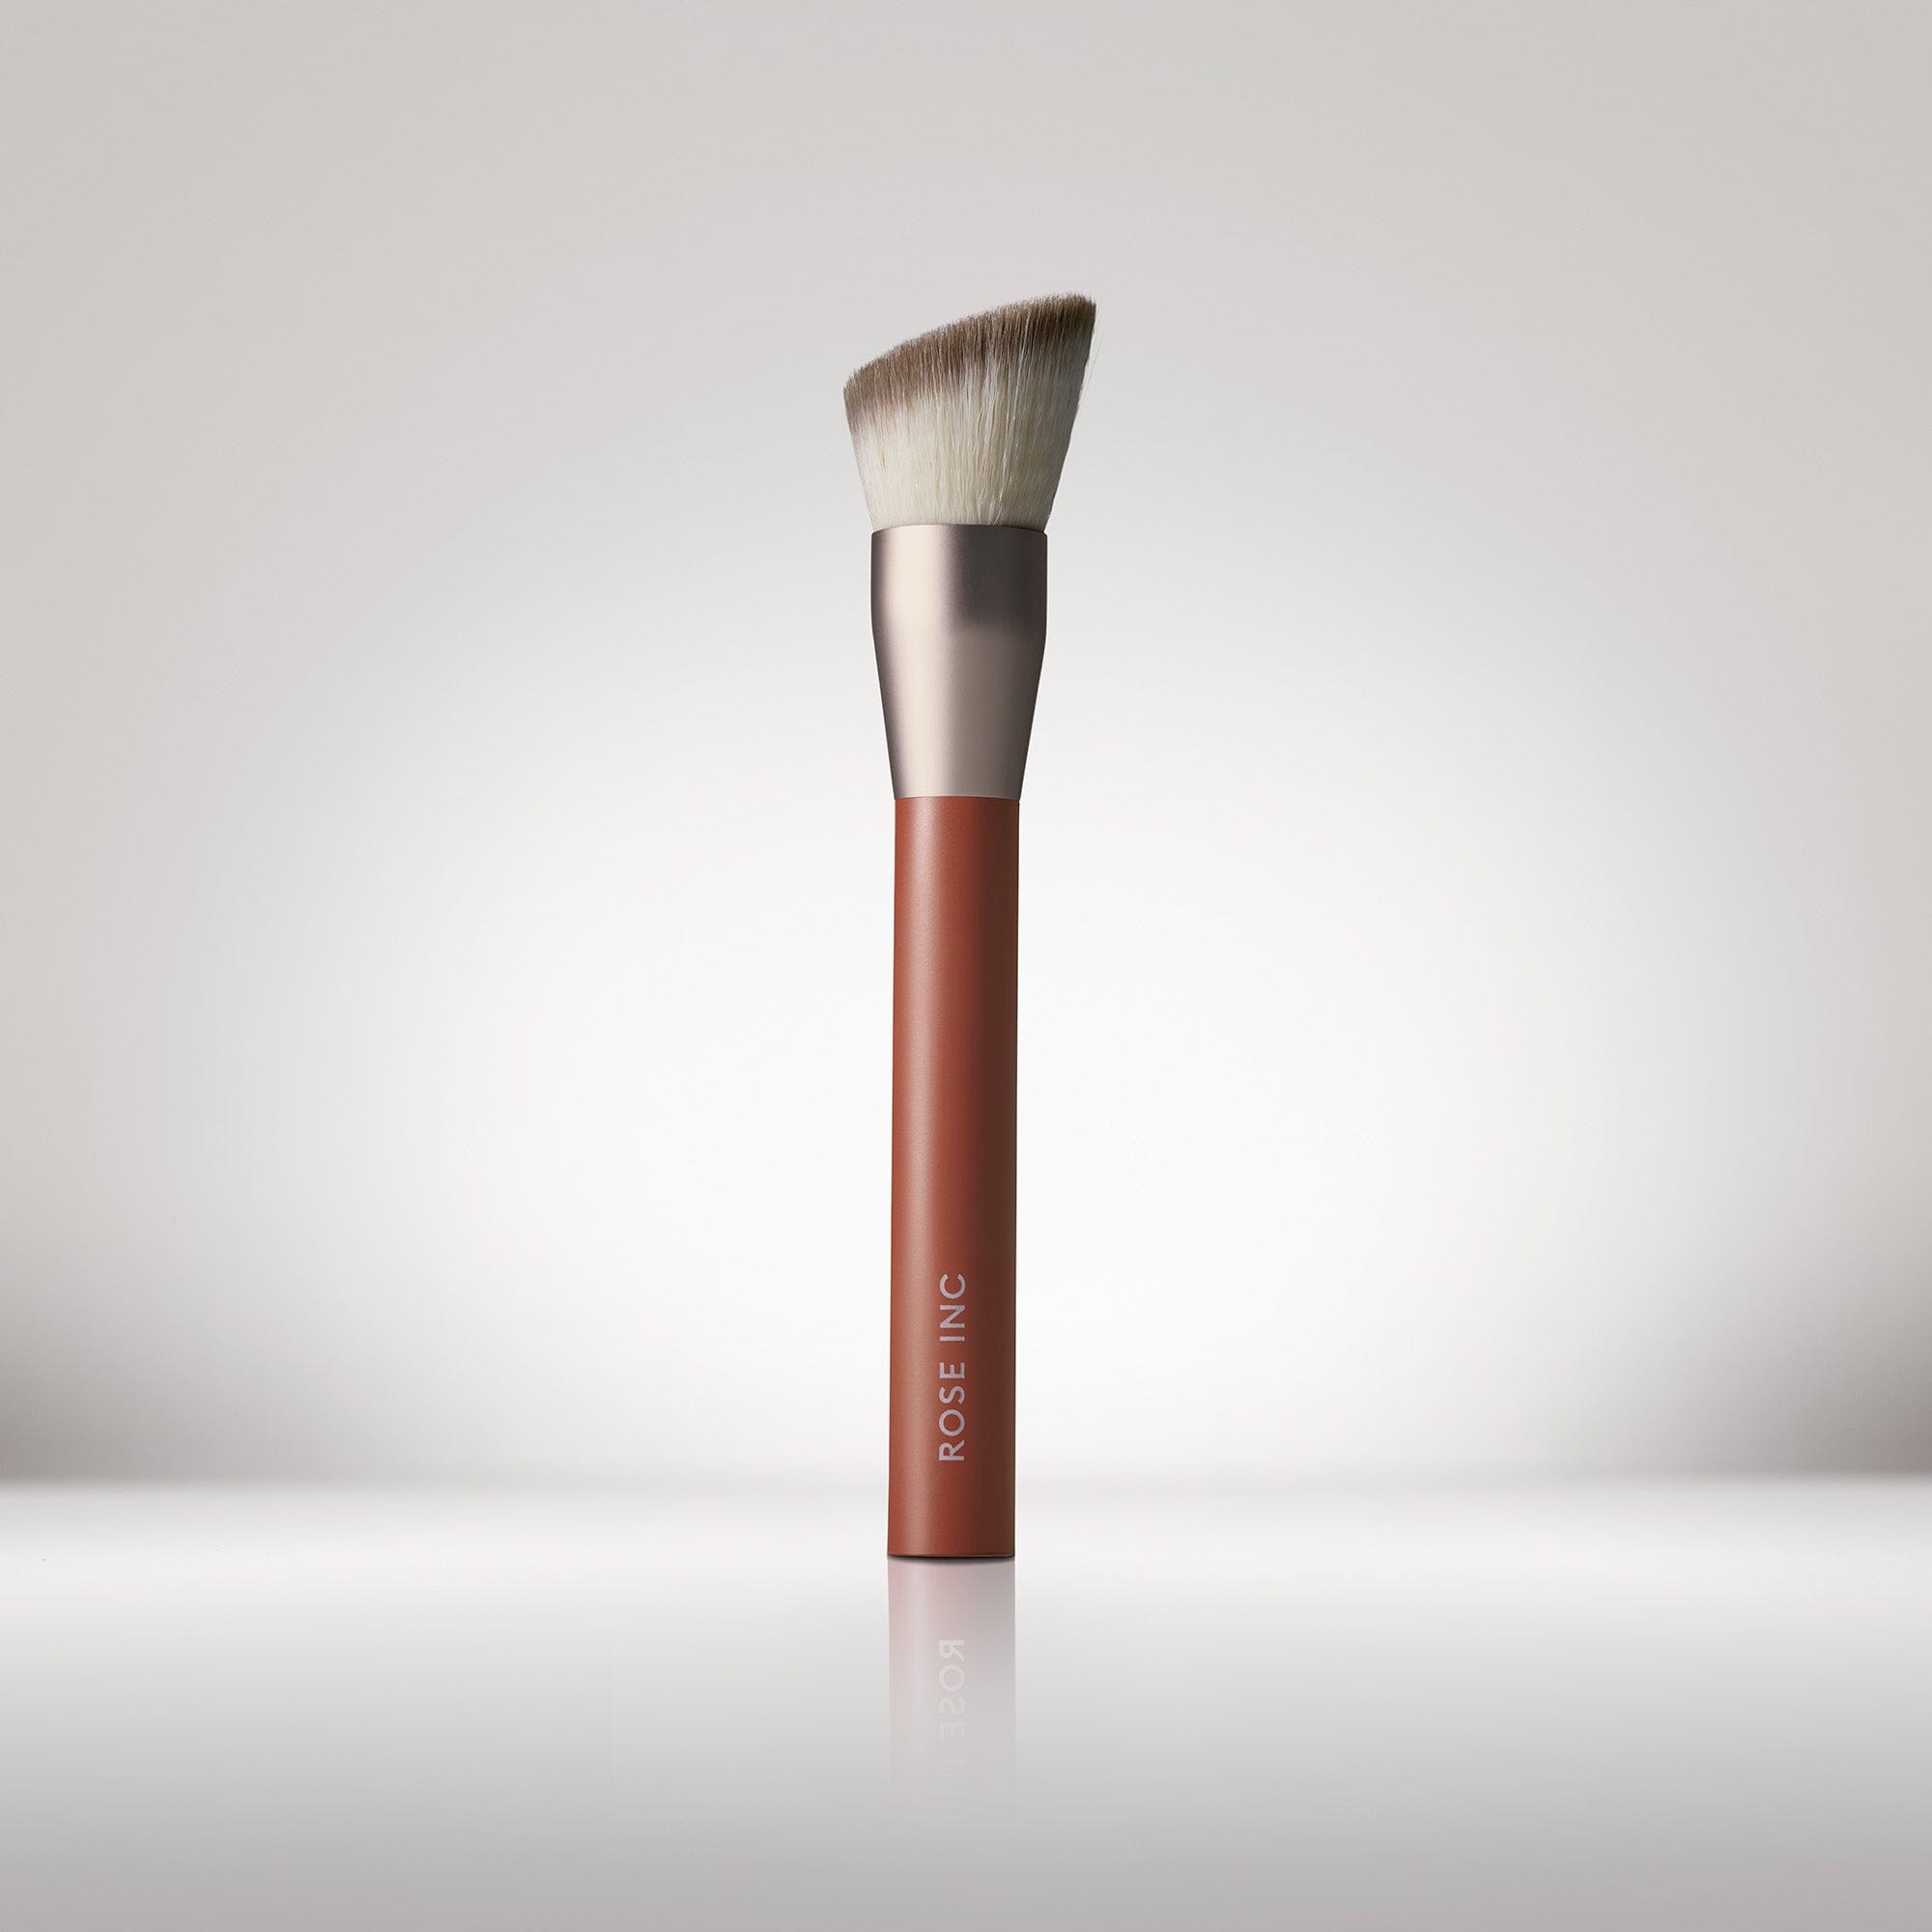 CHANEL Foundation Brush (Synthetic Fibers) - Reviews